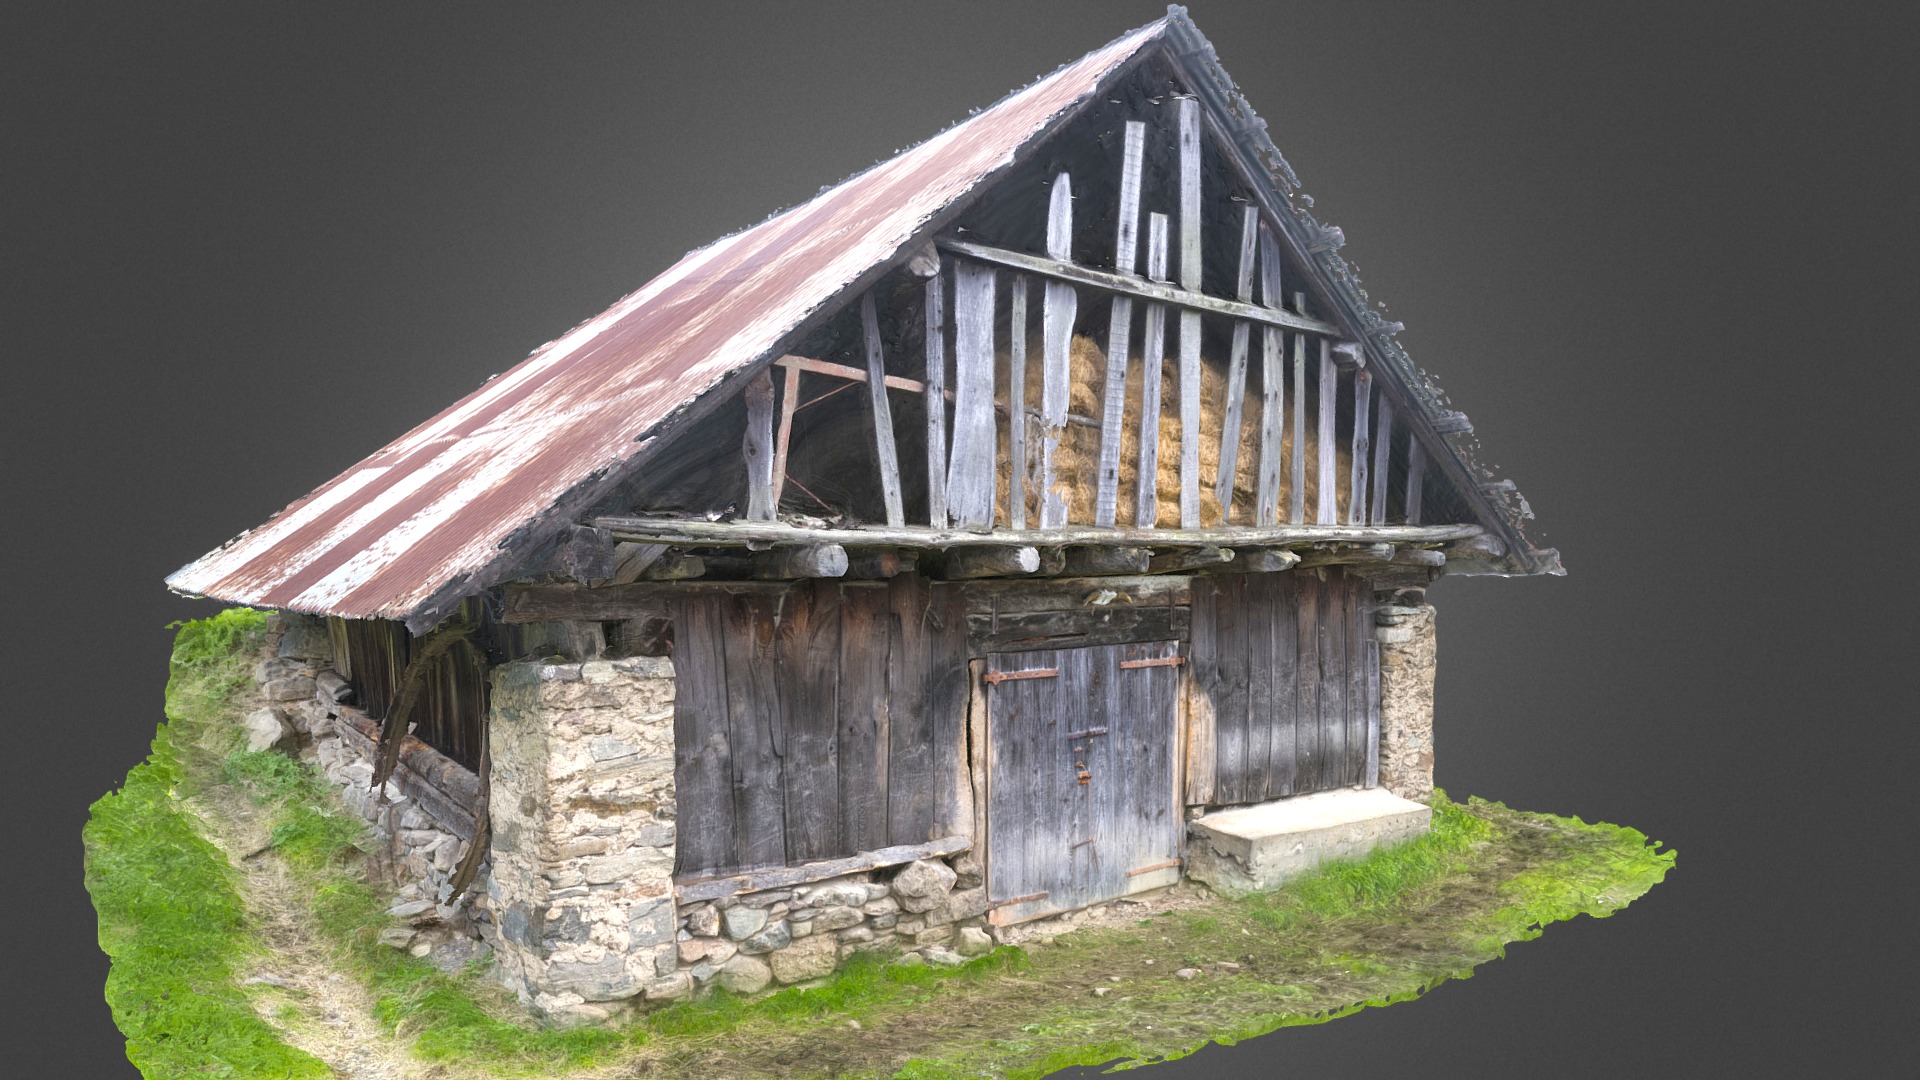 3D model Grange, Vaulnaveys-le-Bas, France - This is a 3D model of the Grange, Vaulnaveys-le-Bas, France. The 3D model is about a wooden building with a roof.